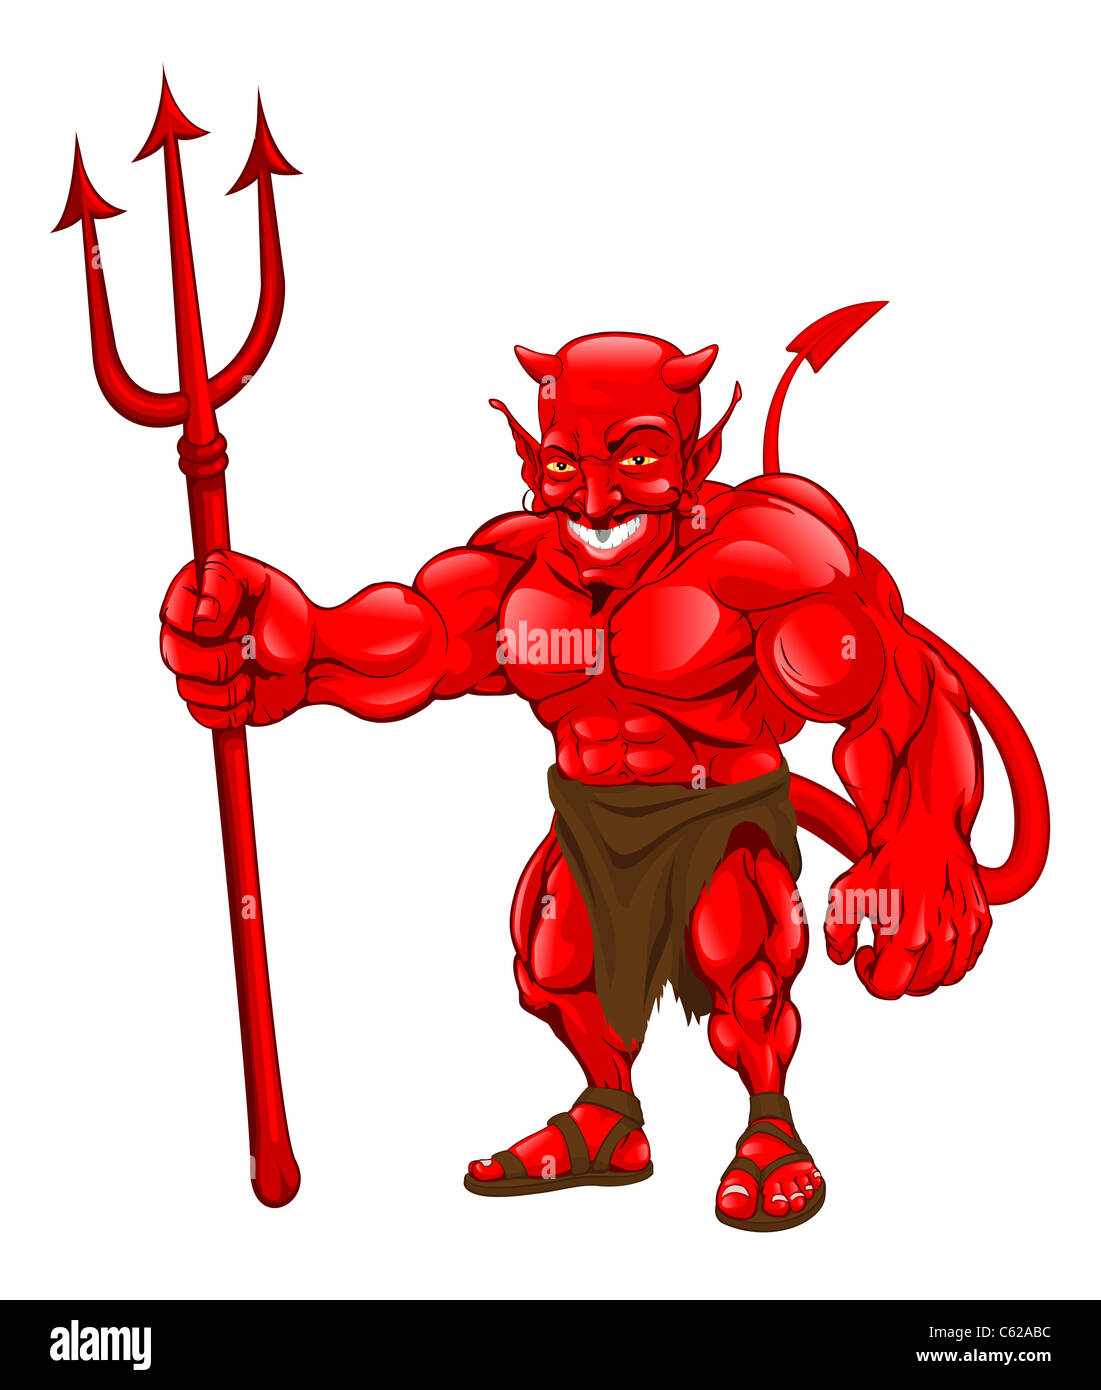 A devil cartoon character illustration standing with pitchfork Stock Photo